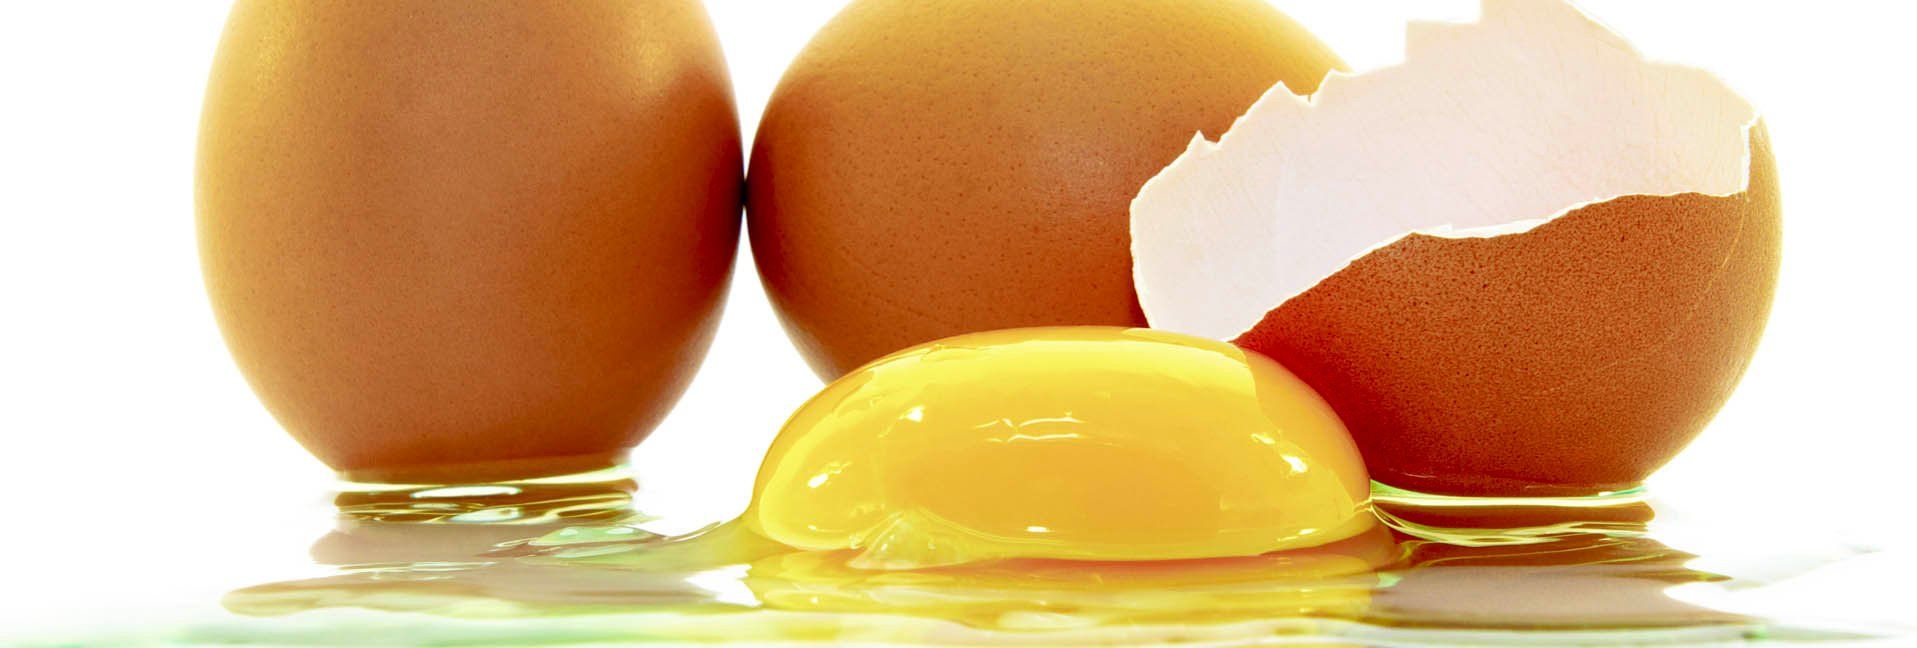 Eggs From Backyard Chickens—Protect Your Health & Avoid Drug Residues